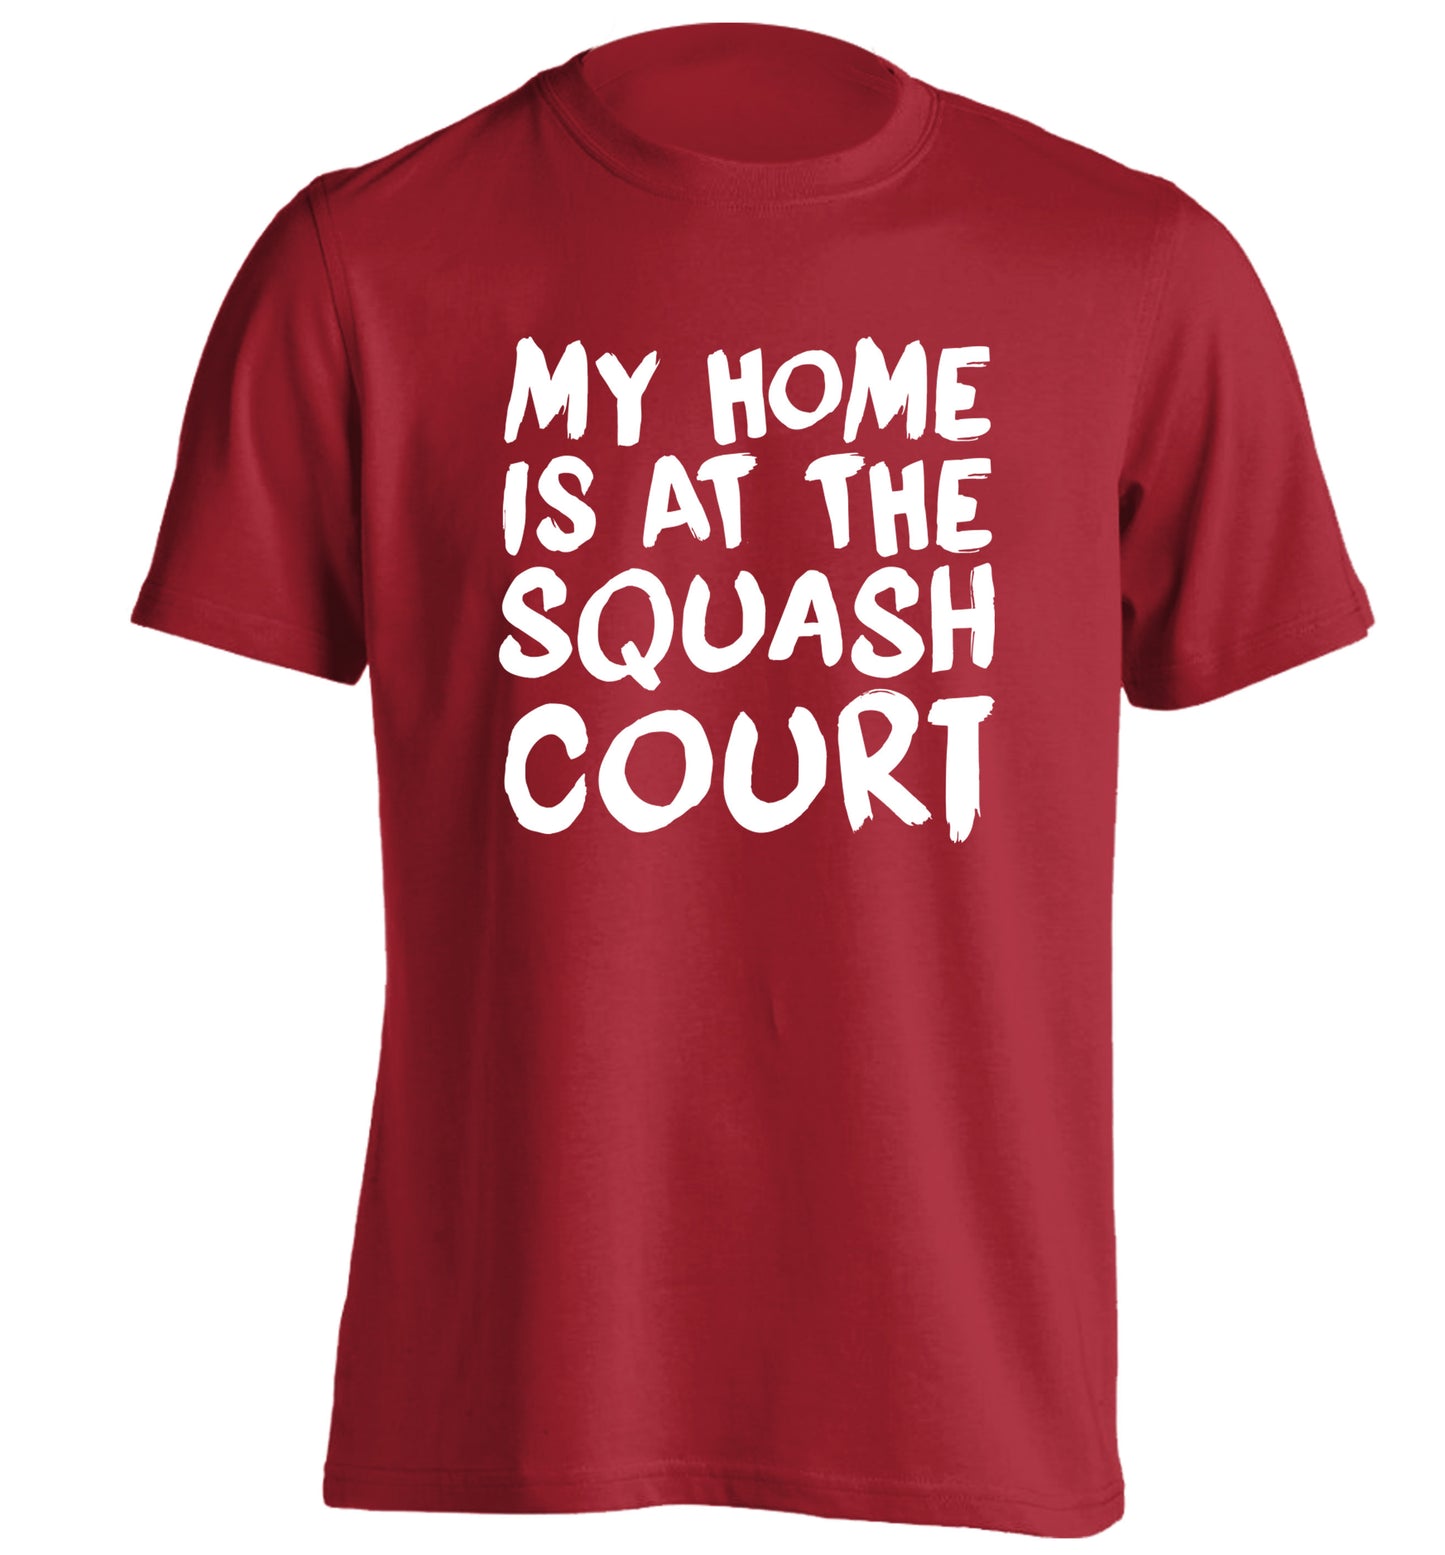 My home is at the squash court adults unisex red Tshirt 2XL